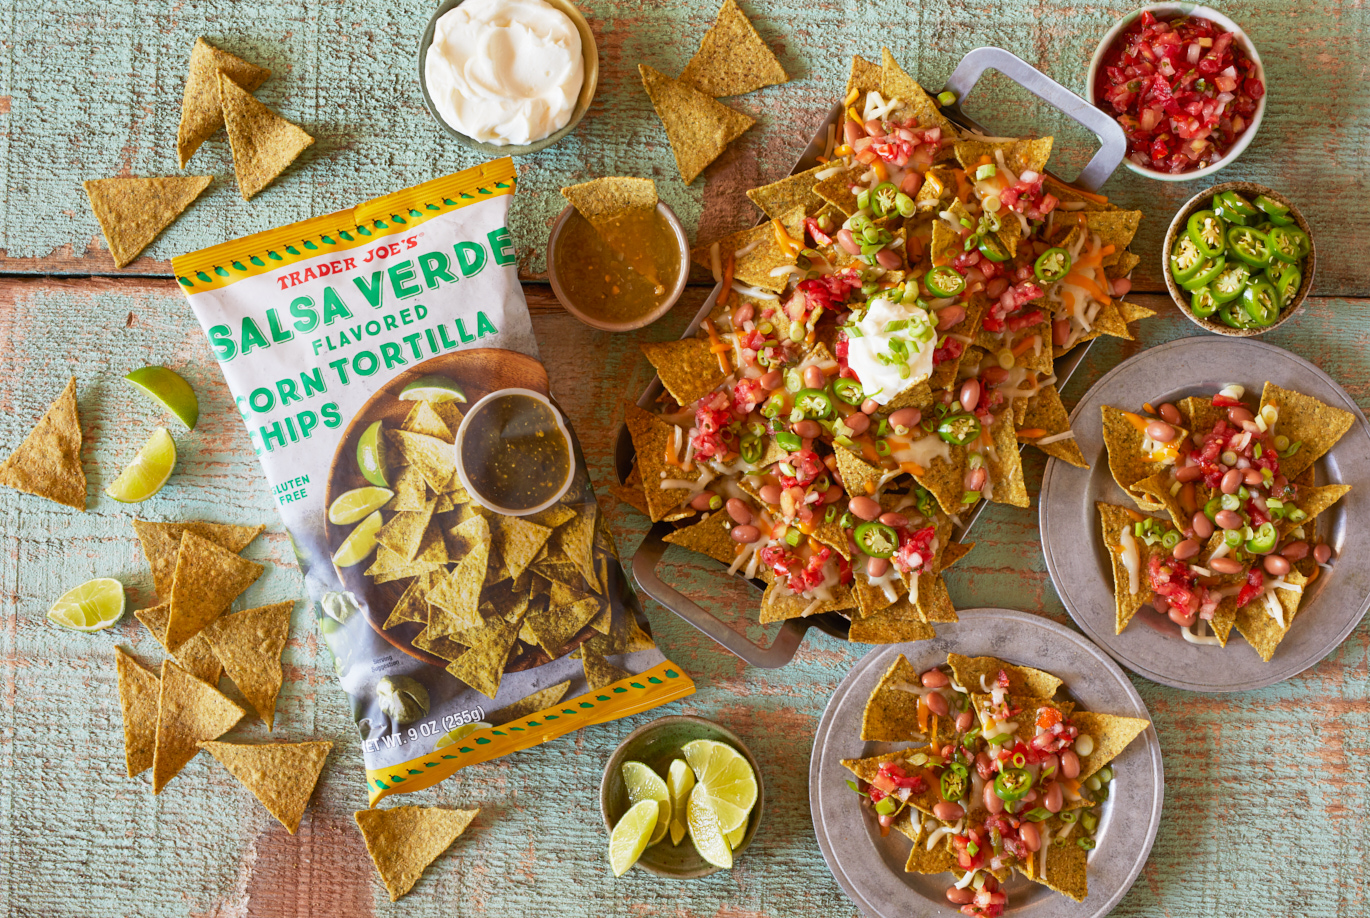 Trader Joe's Salsa Verde Flavored Corn Tortilla Chips prepared in a dish as nachos, with pinto beans, cheee, salsa, jalapeño slices and sour cream; plates and chips surrounding